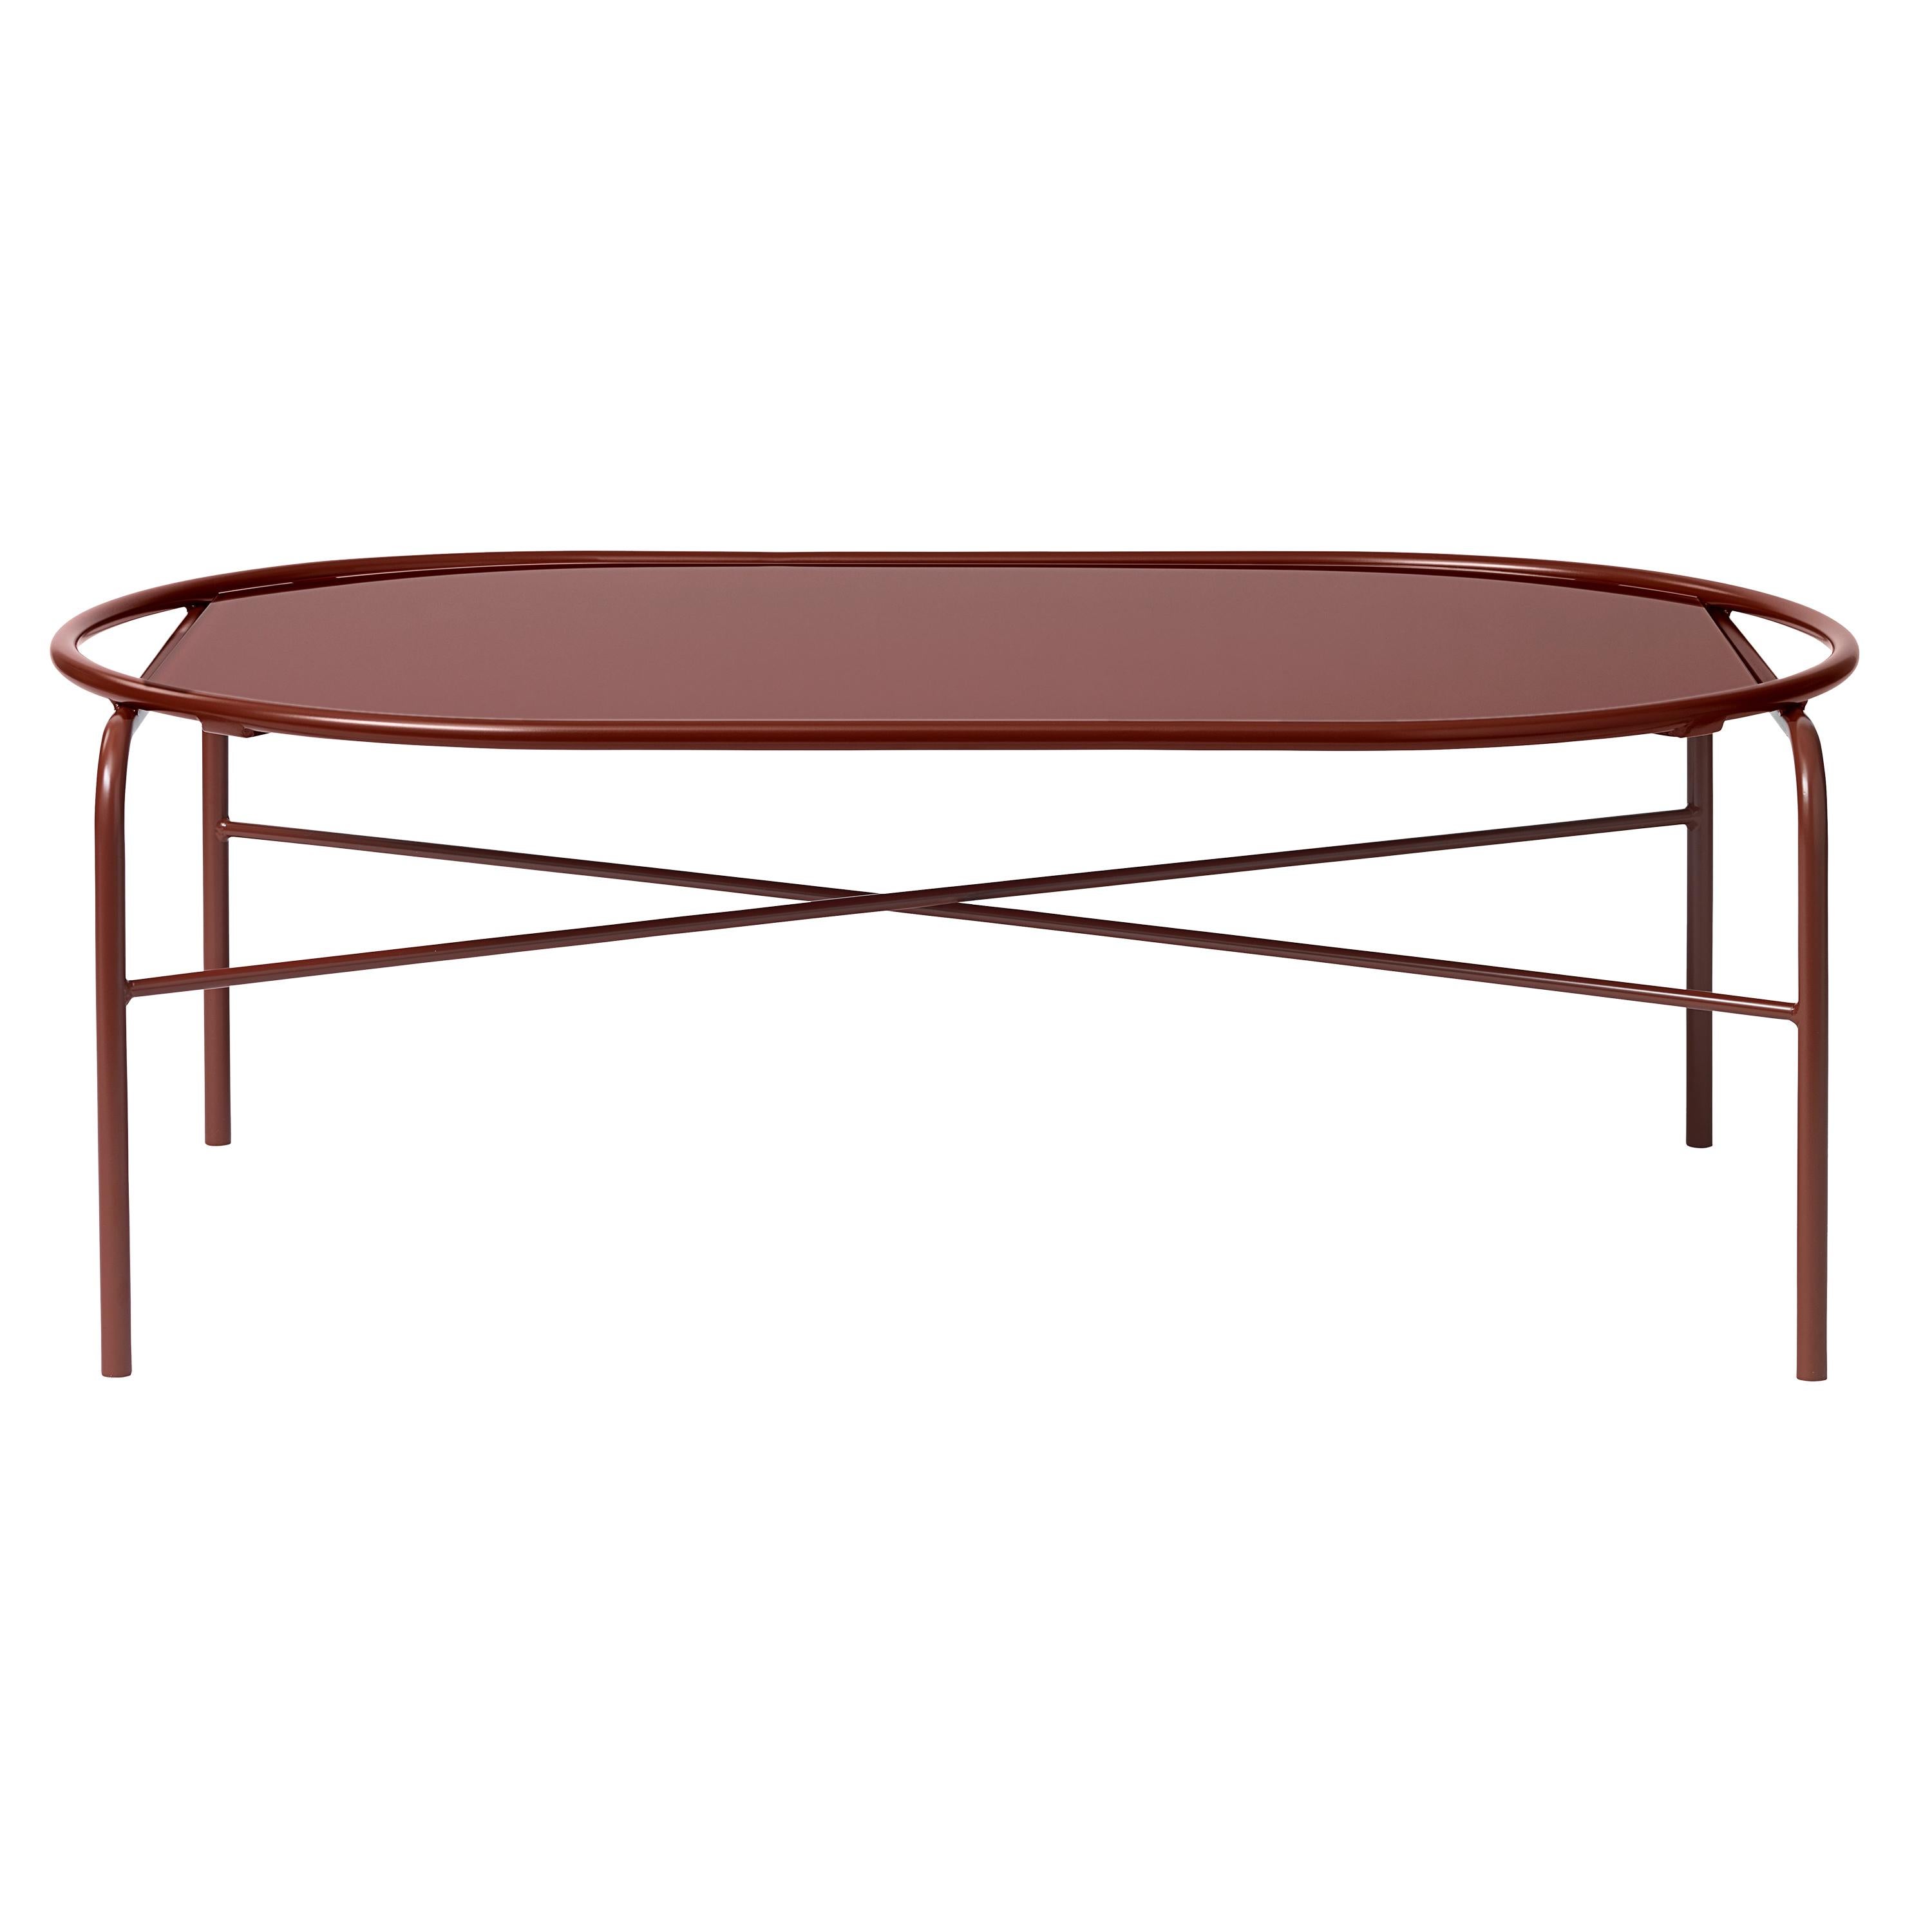 For Sale: Red (Glass red) Secant Oval Table in Steel Frame, by Sara Wright Polmar from Warm Nordic